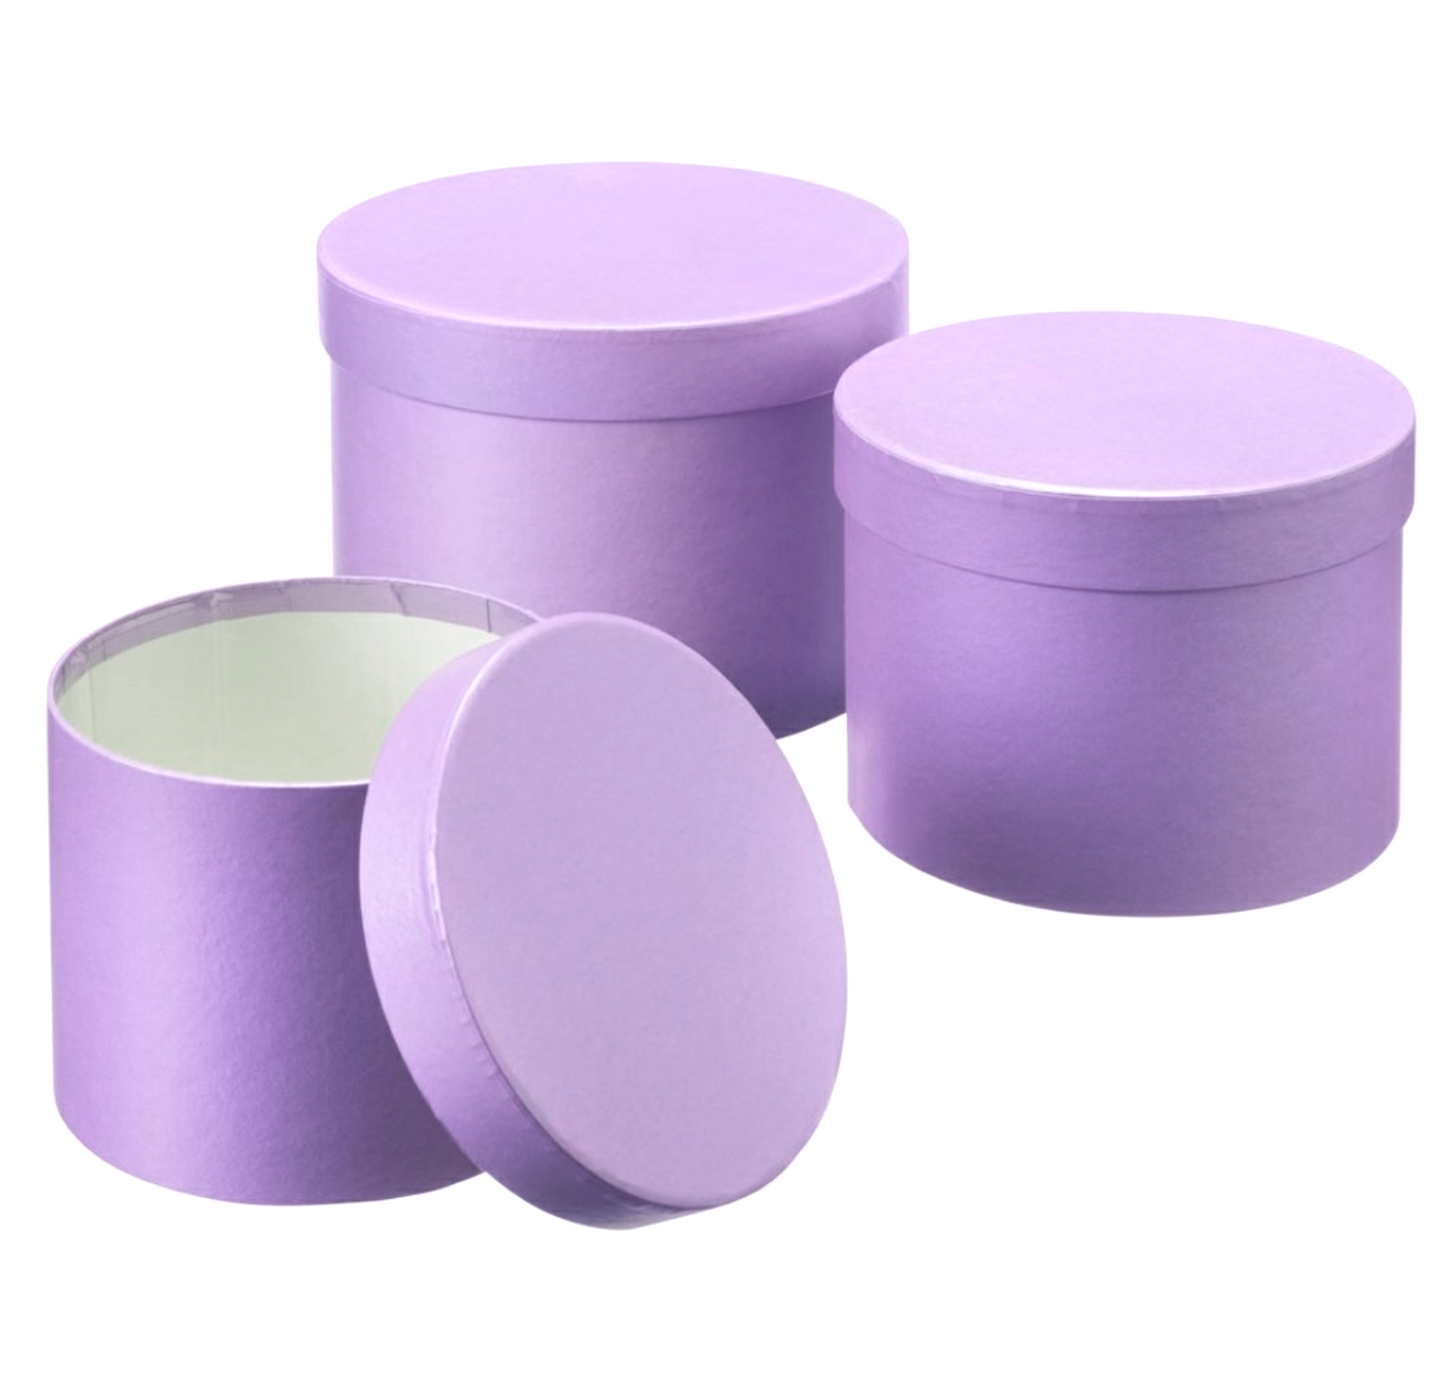 Set of 3 - Round Any Colour Hat Box Boxes